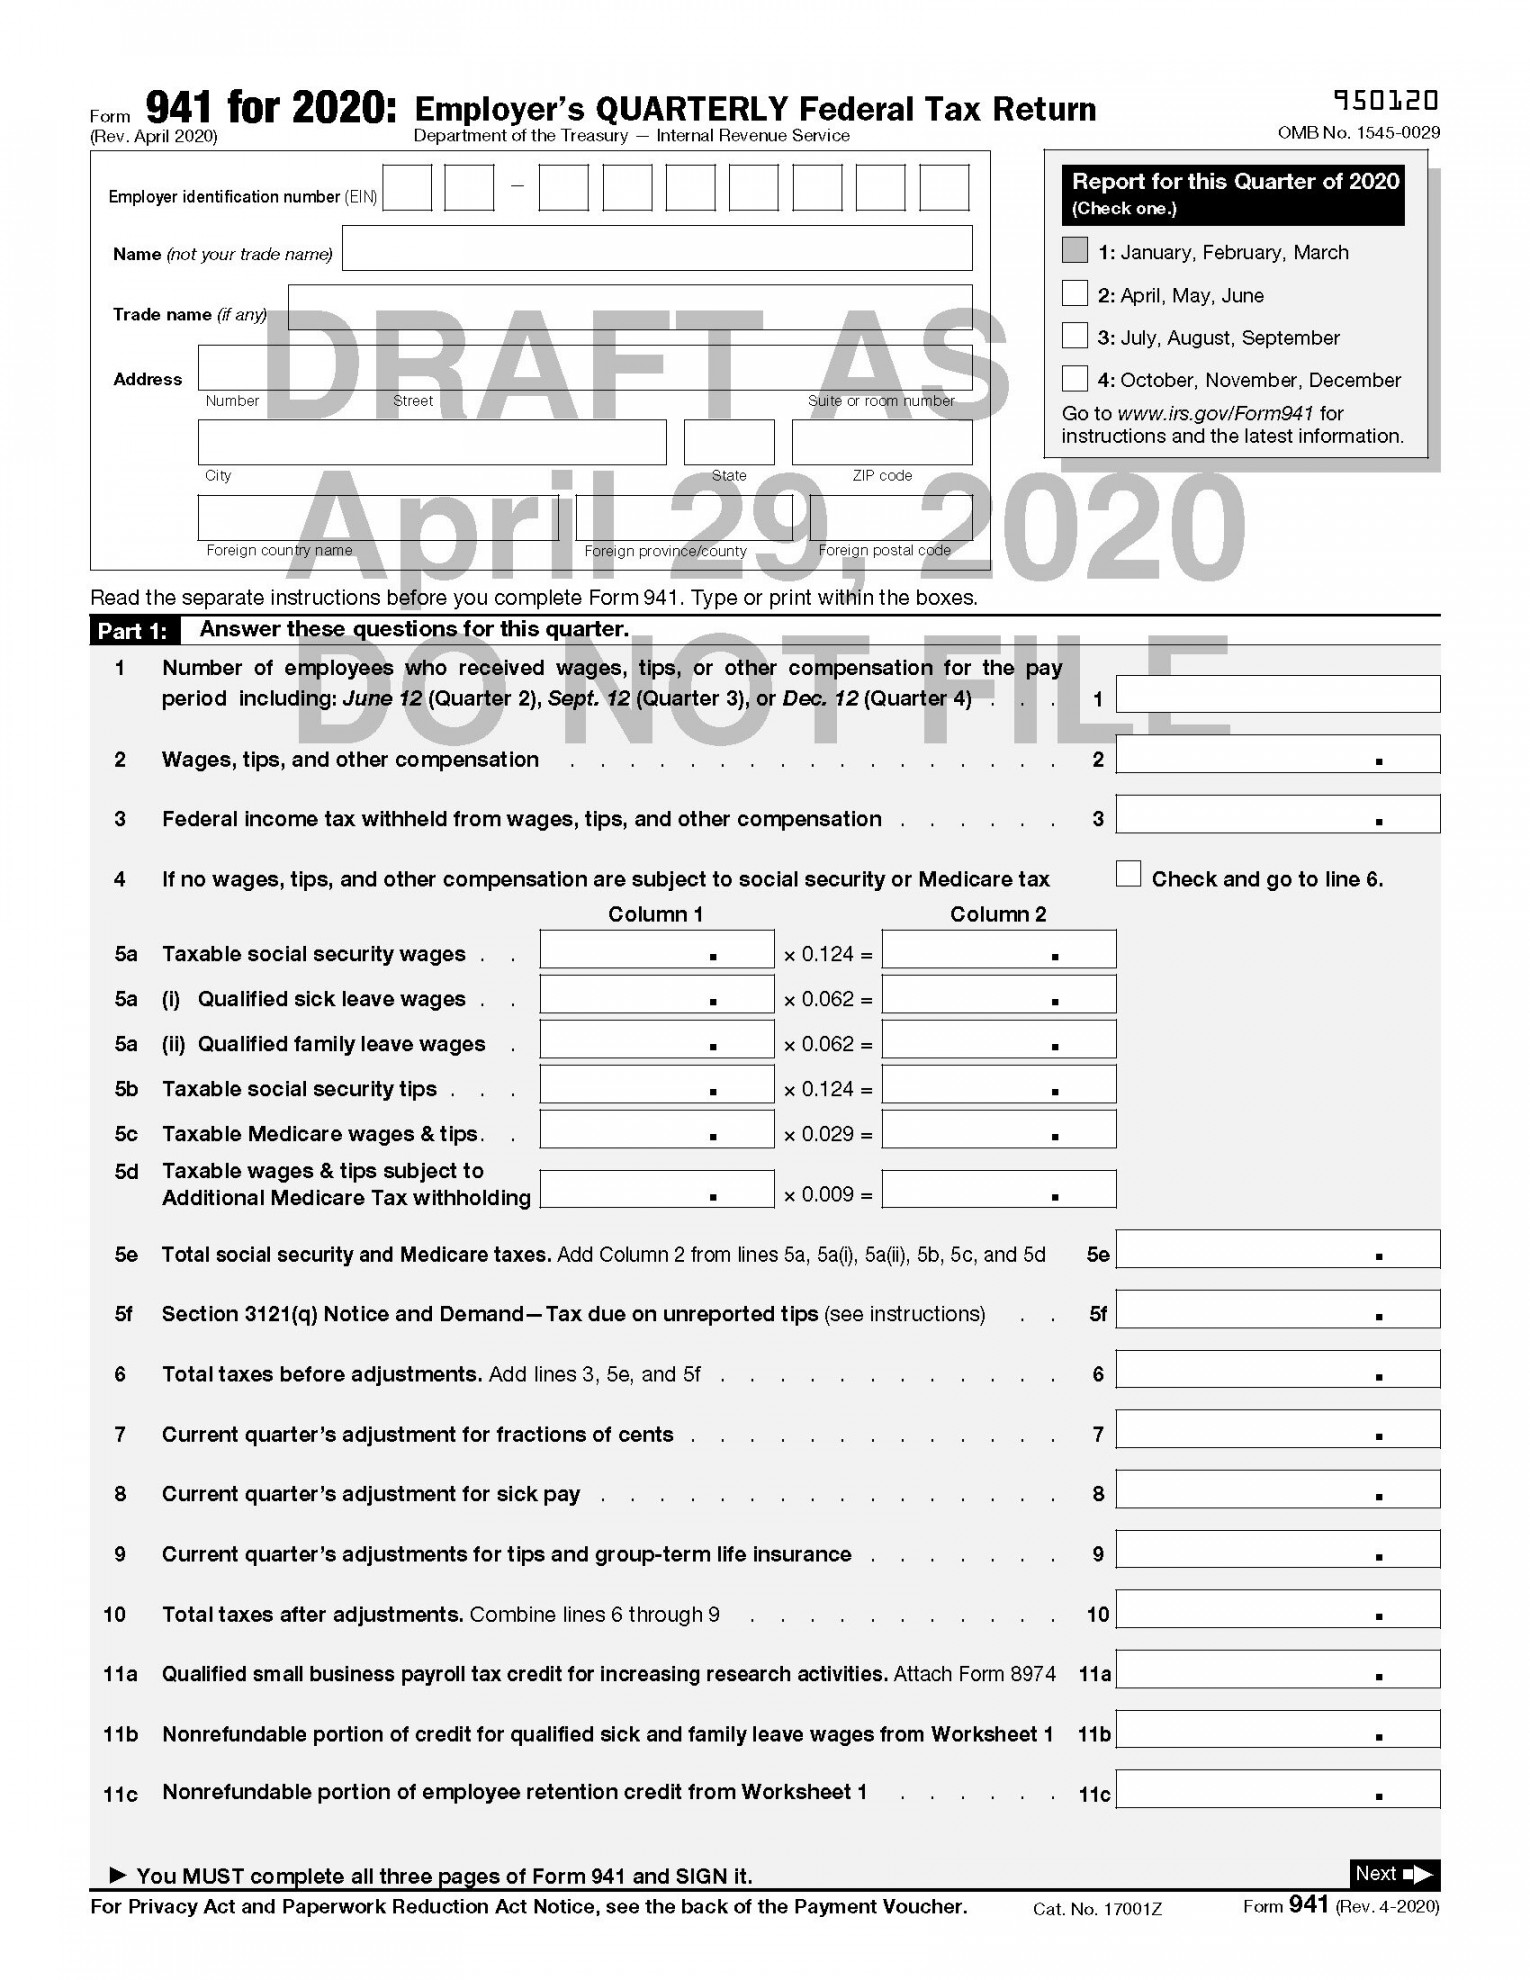 Draft of Revised Form  Released by IRS - Includes FFCRA and